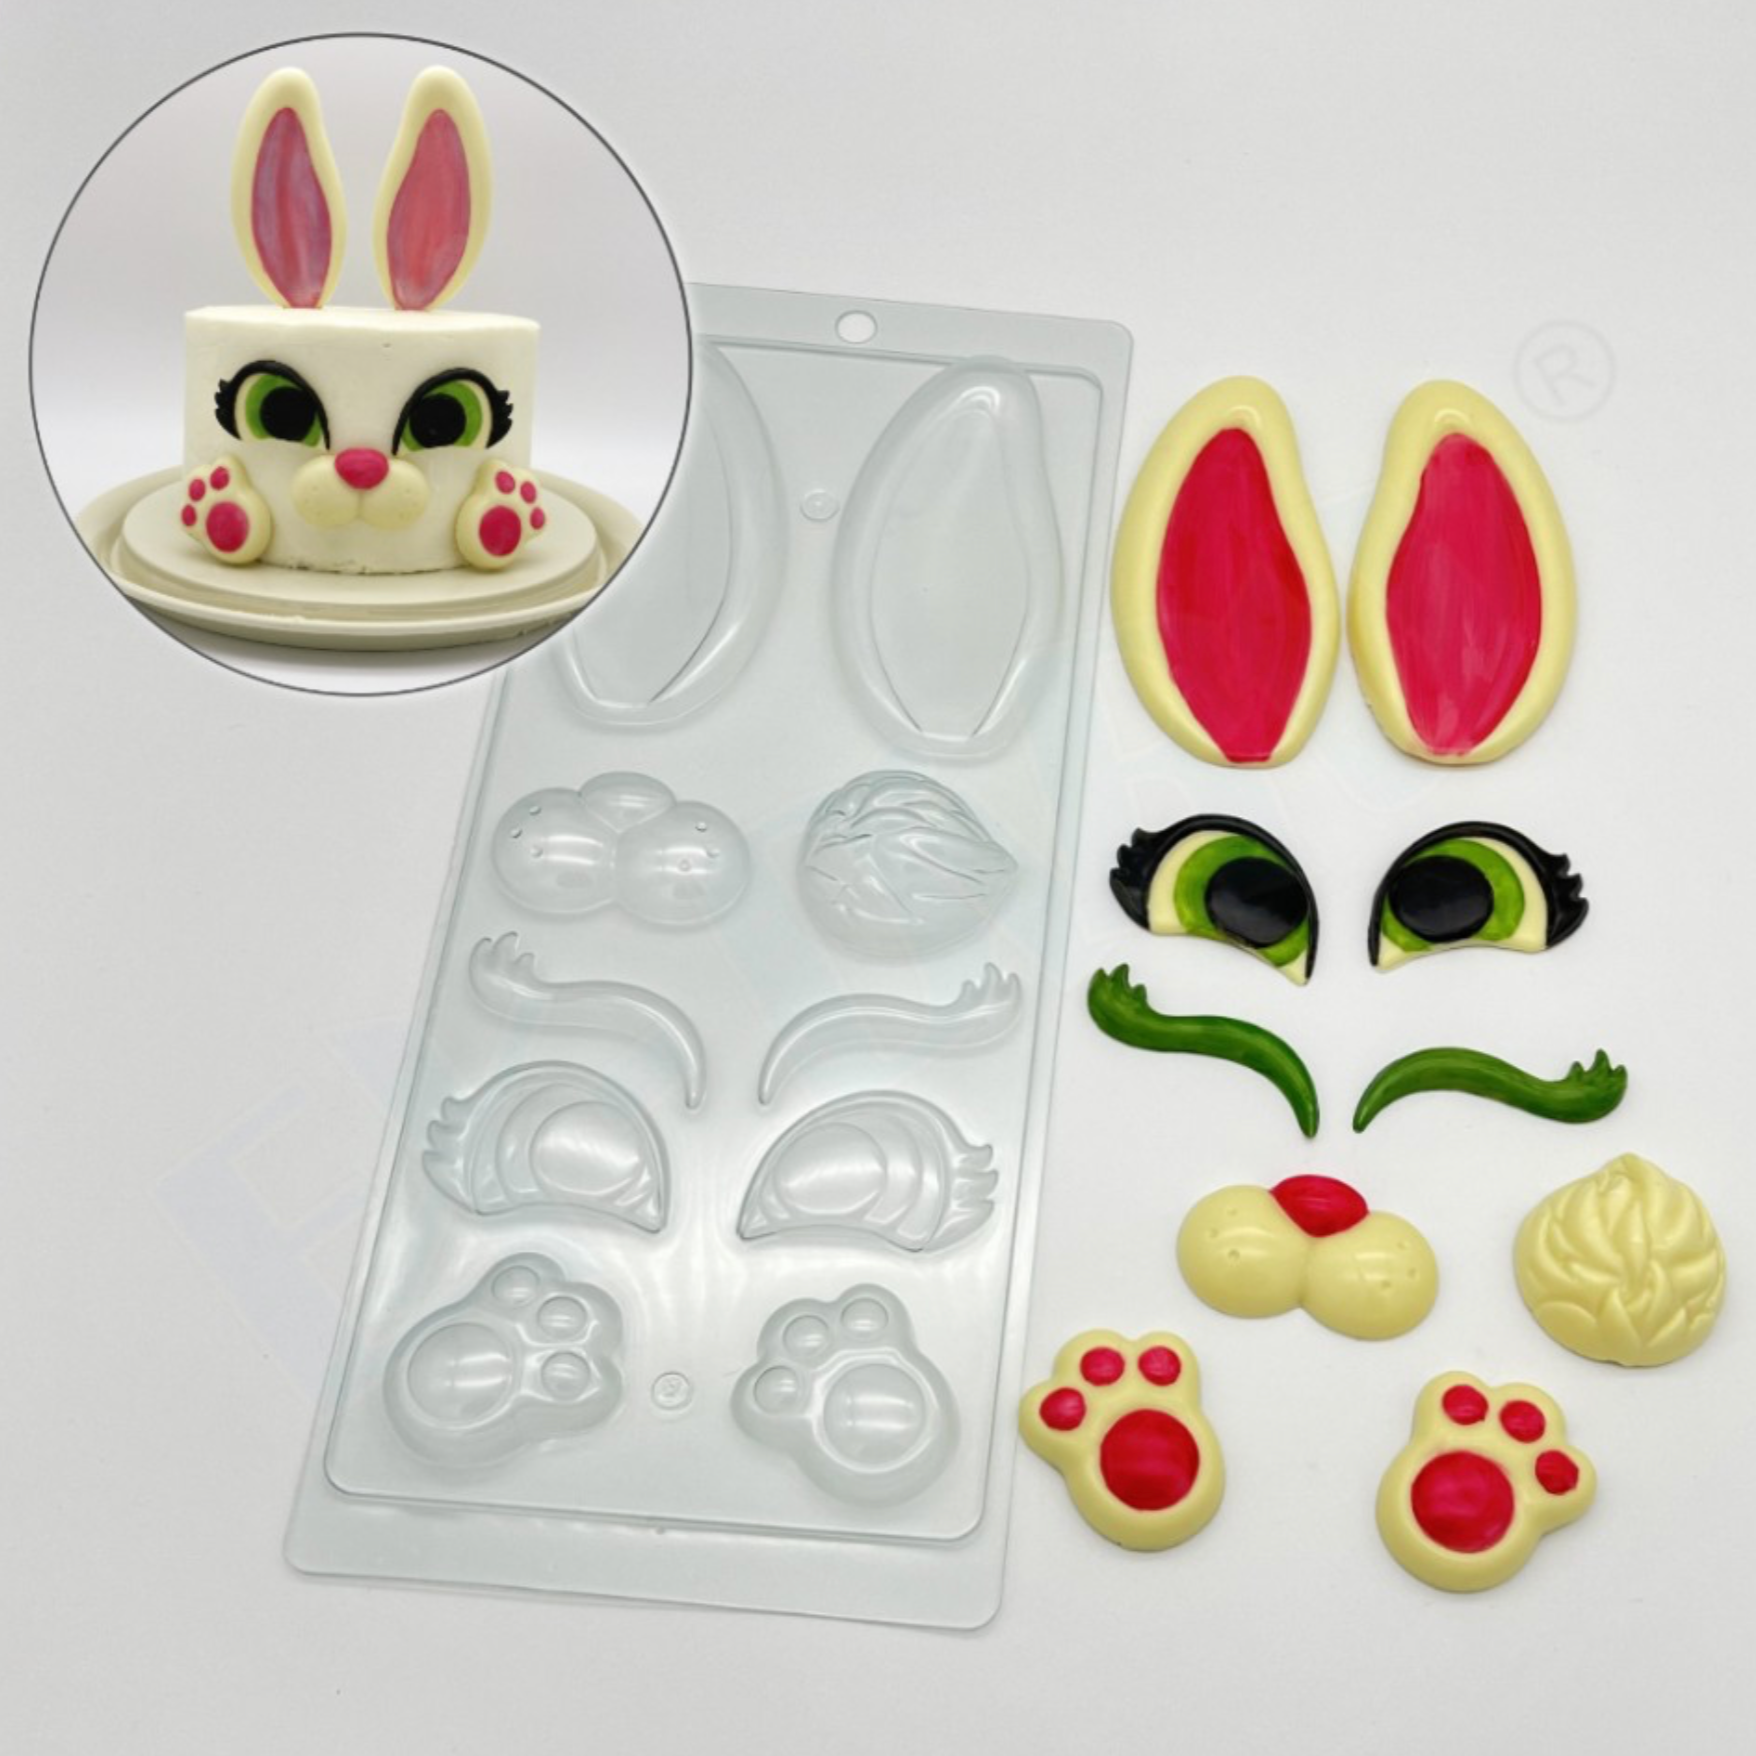 East Egg Mold Silicone Easter Egg Mold 